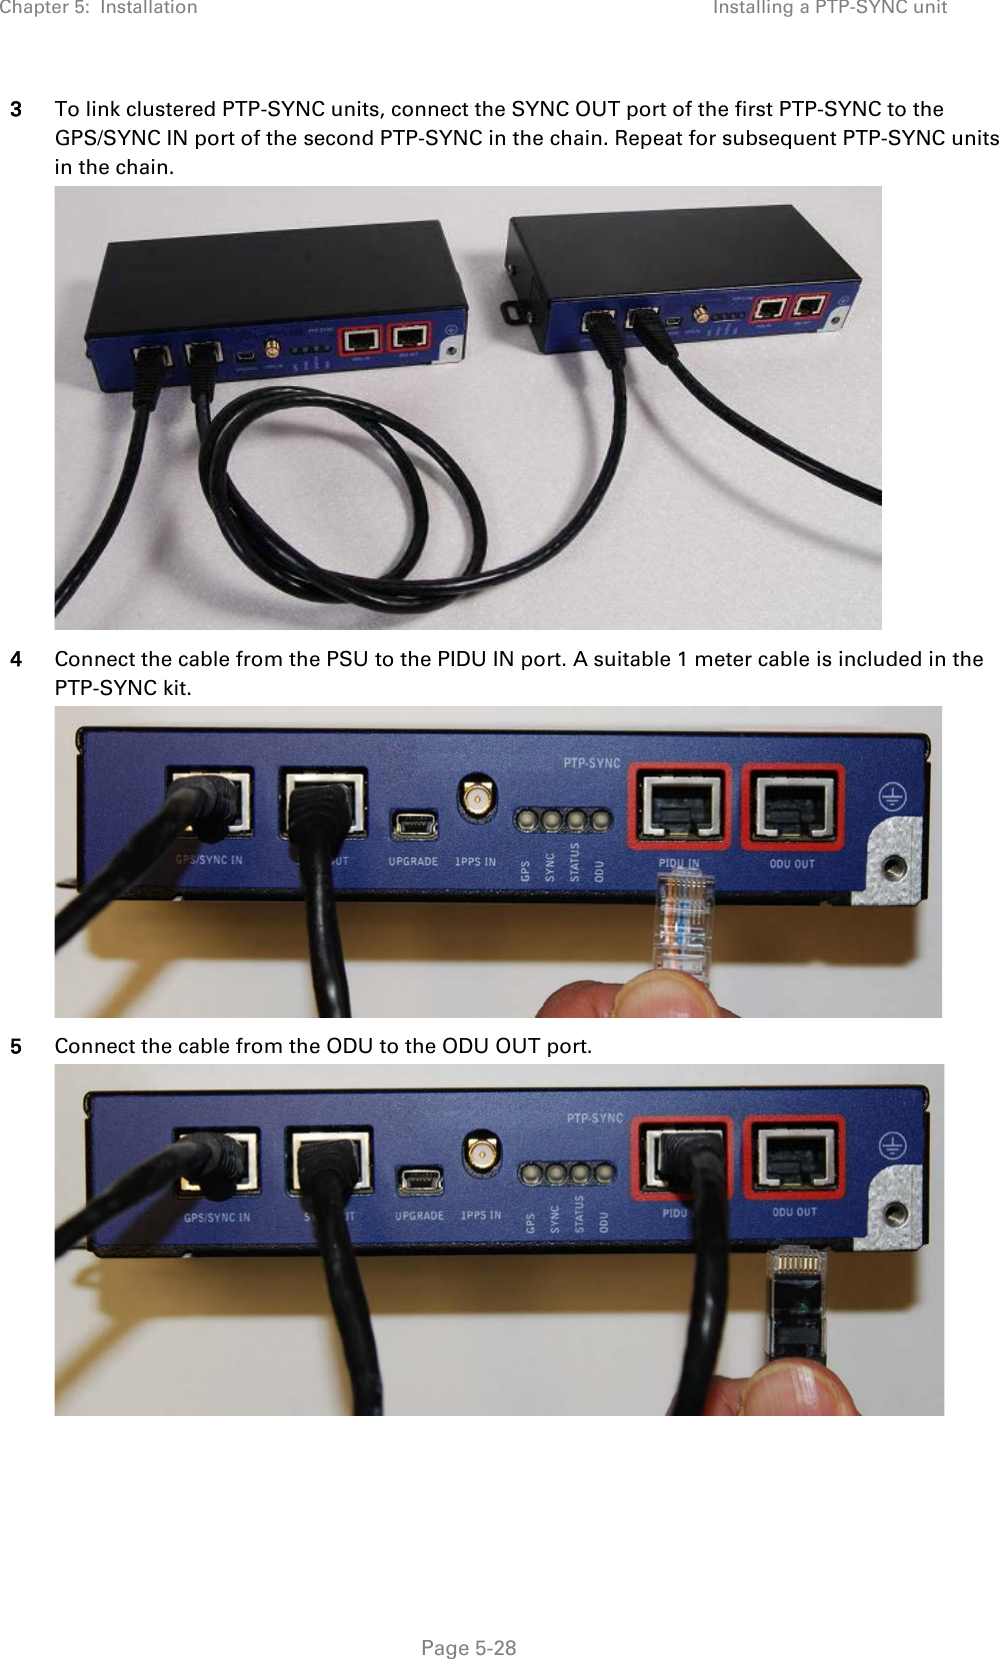 Chapter 5:  Installation Installing a PTP-SYNC unit  3 To link clustered PTP-SYNC units, connect the SYNC OUT port of the first PTP-SYNC to the GPS/SYNC IN port of the second PTP-SYNC in the chain. Repeat for subsequent PTP-SYNC units in the chain.  4 Connect the cable from the PSU to the PIDU IN port. A suitable 1 meter cable is included in the PTP-SYNC kit.  5 Connect the cable from the ODU to the ODU OUT port.   Page 5-28 